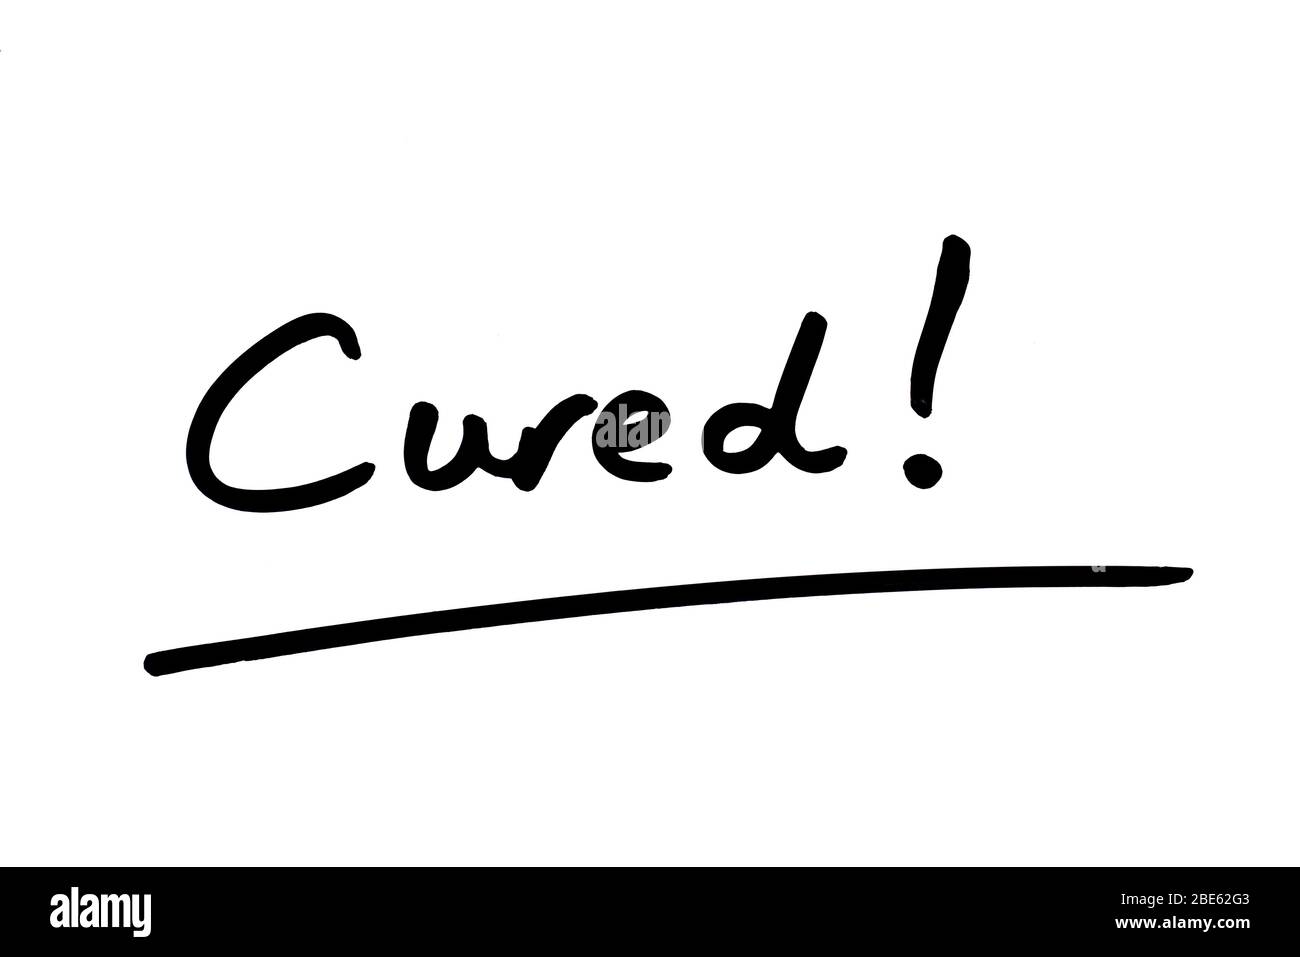 Cured! handwritten on a white background. Stock Photo